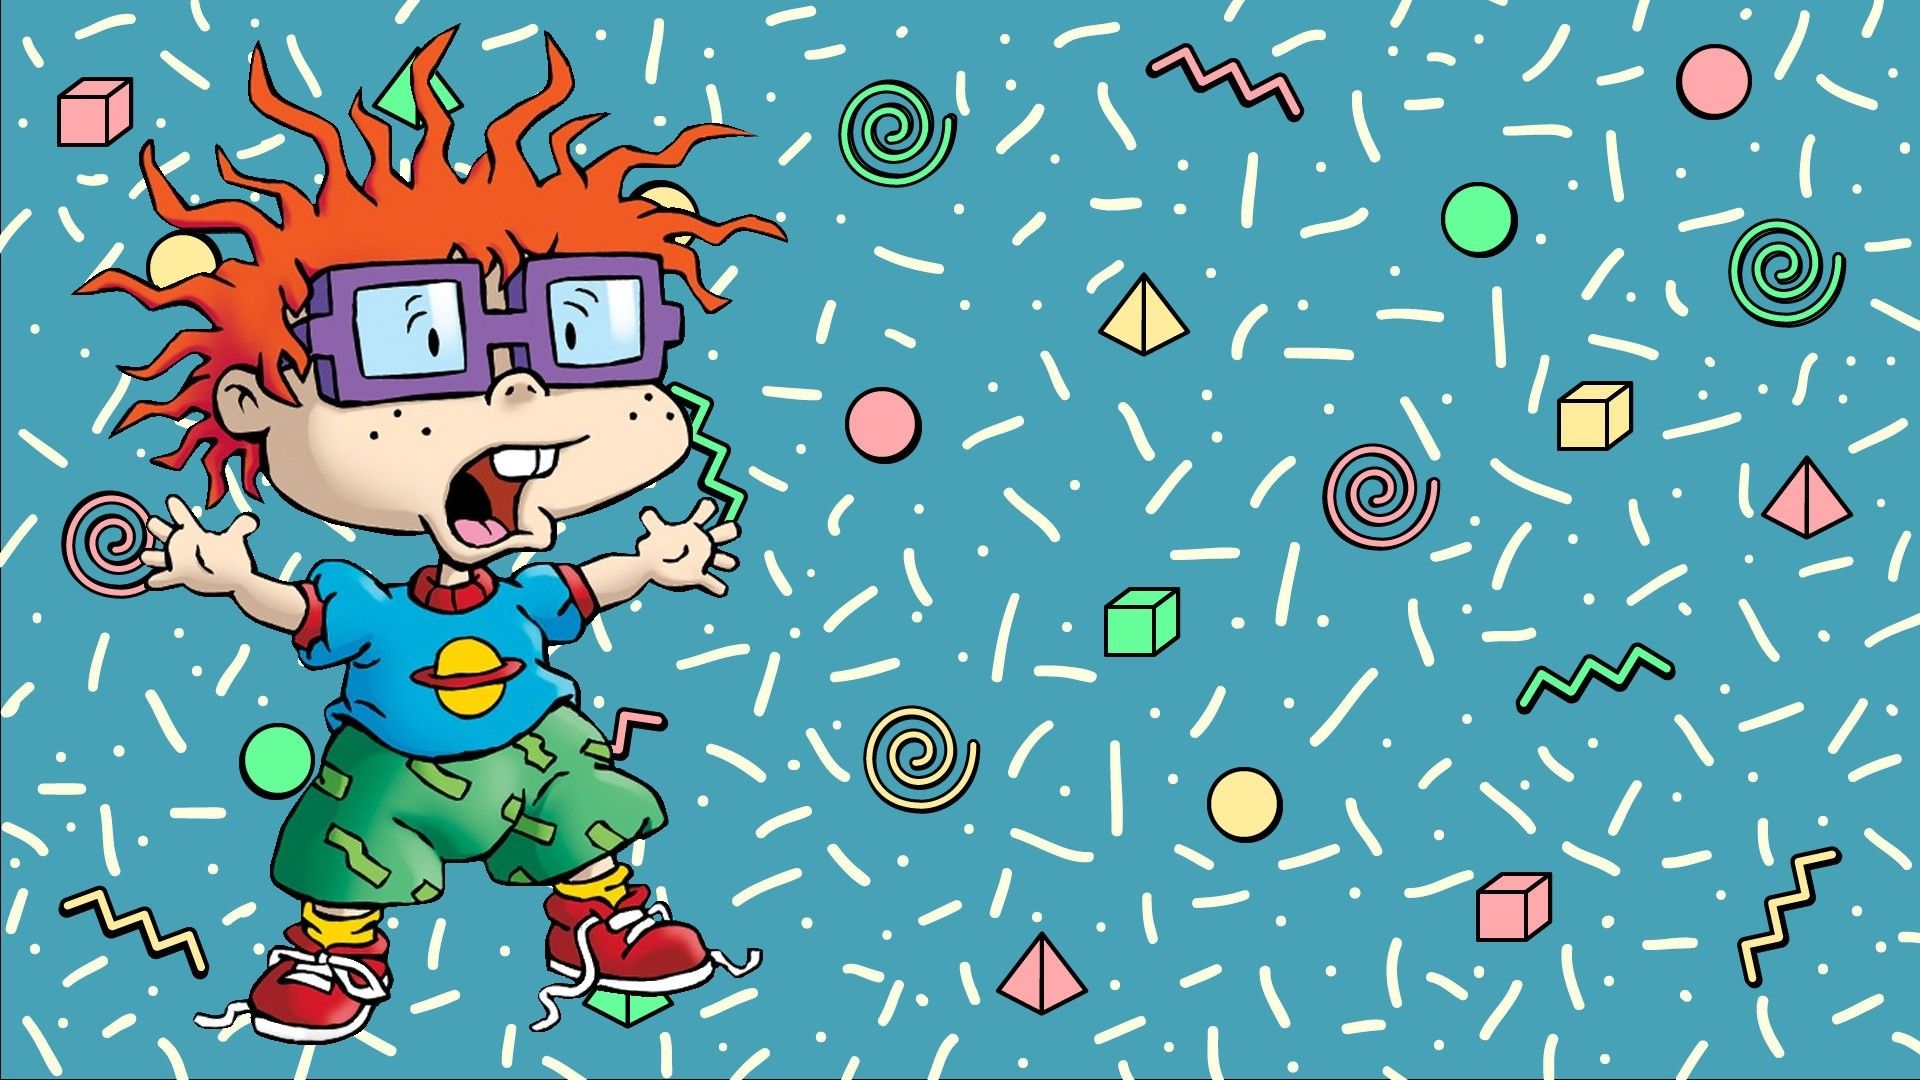 Rugrats Wallpapers: 11 Image, Category.